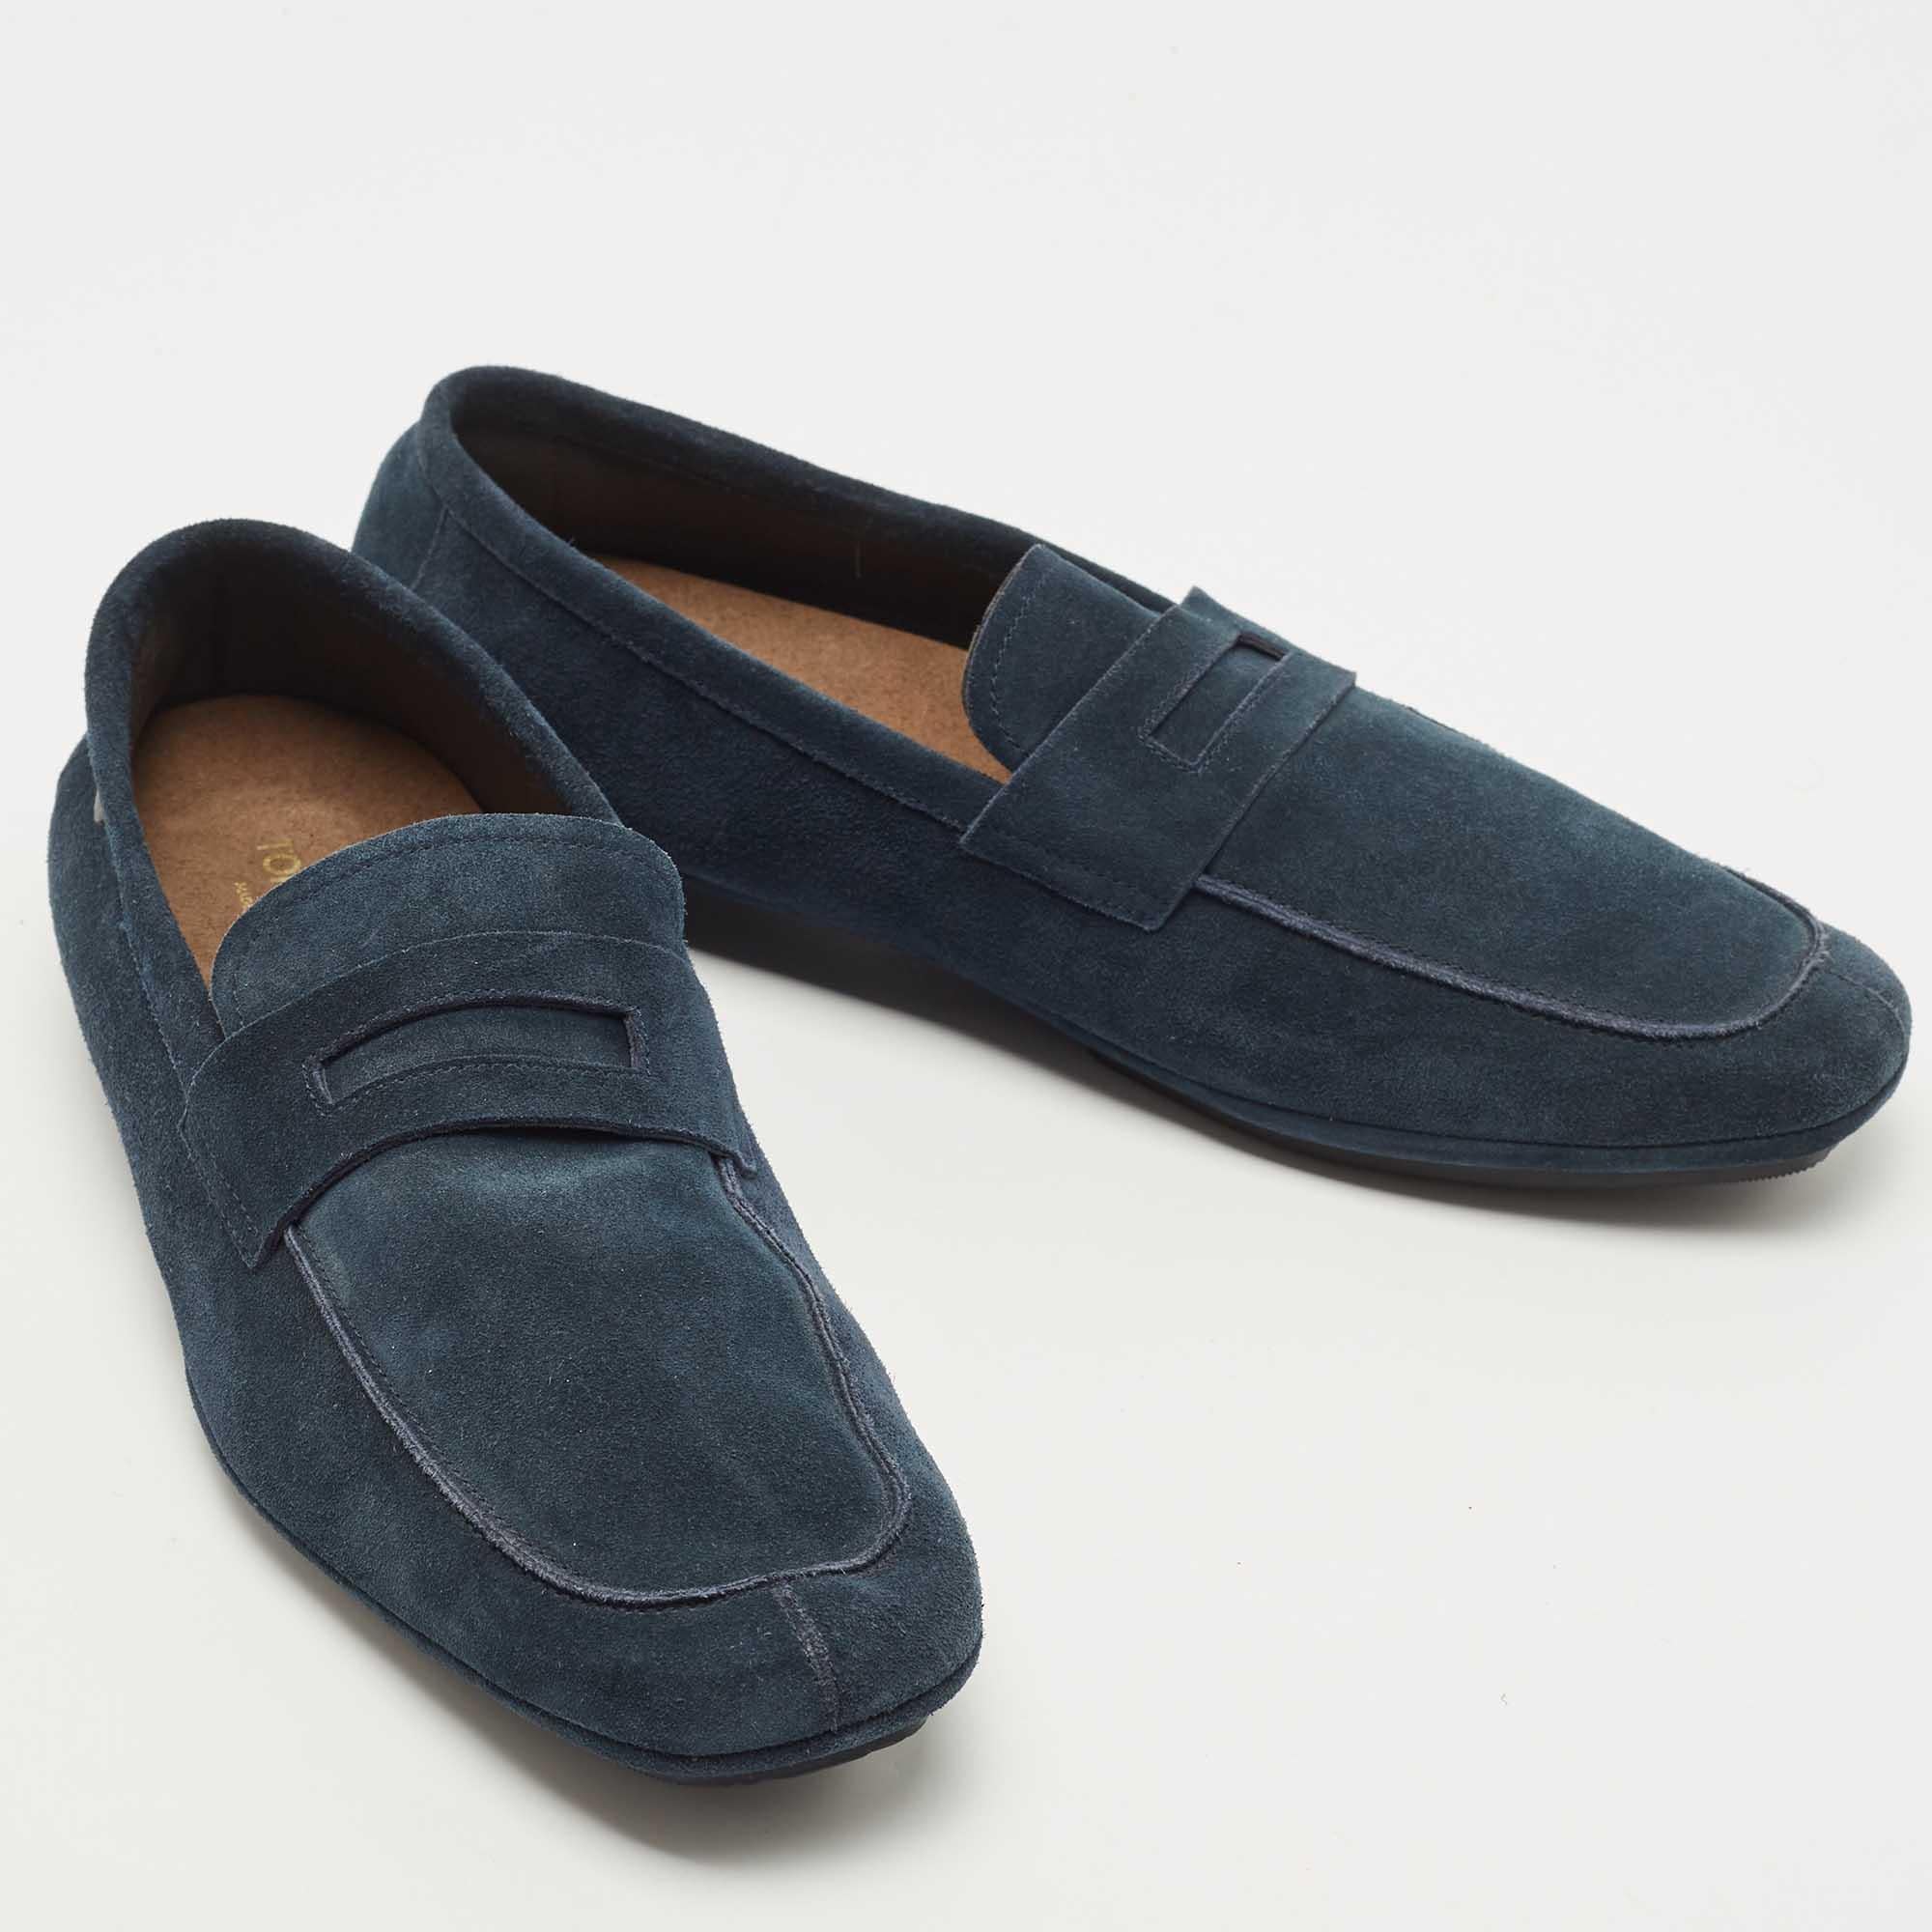 Tom Ford Dark Blue Suede Berwick Loafers Size 43 1